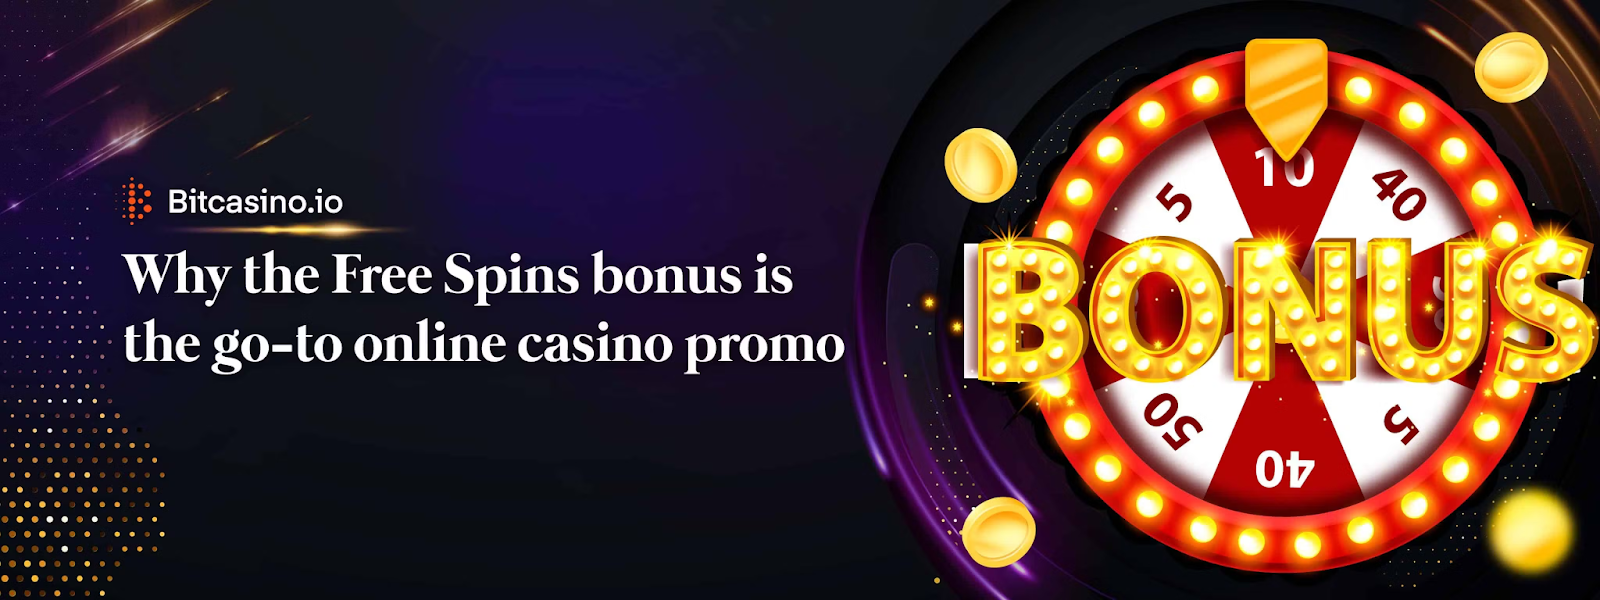 Betsoft Slots Review